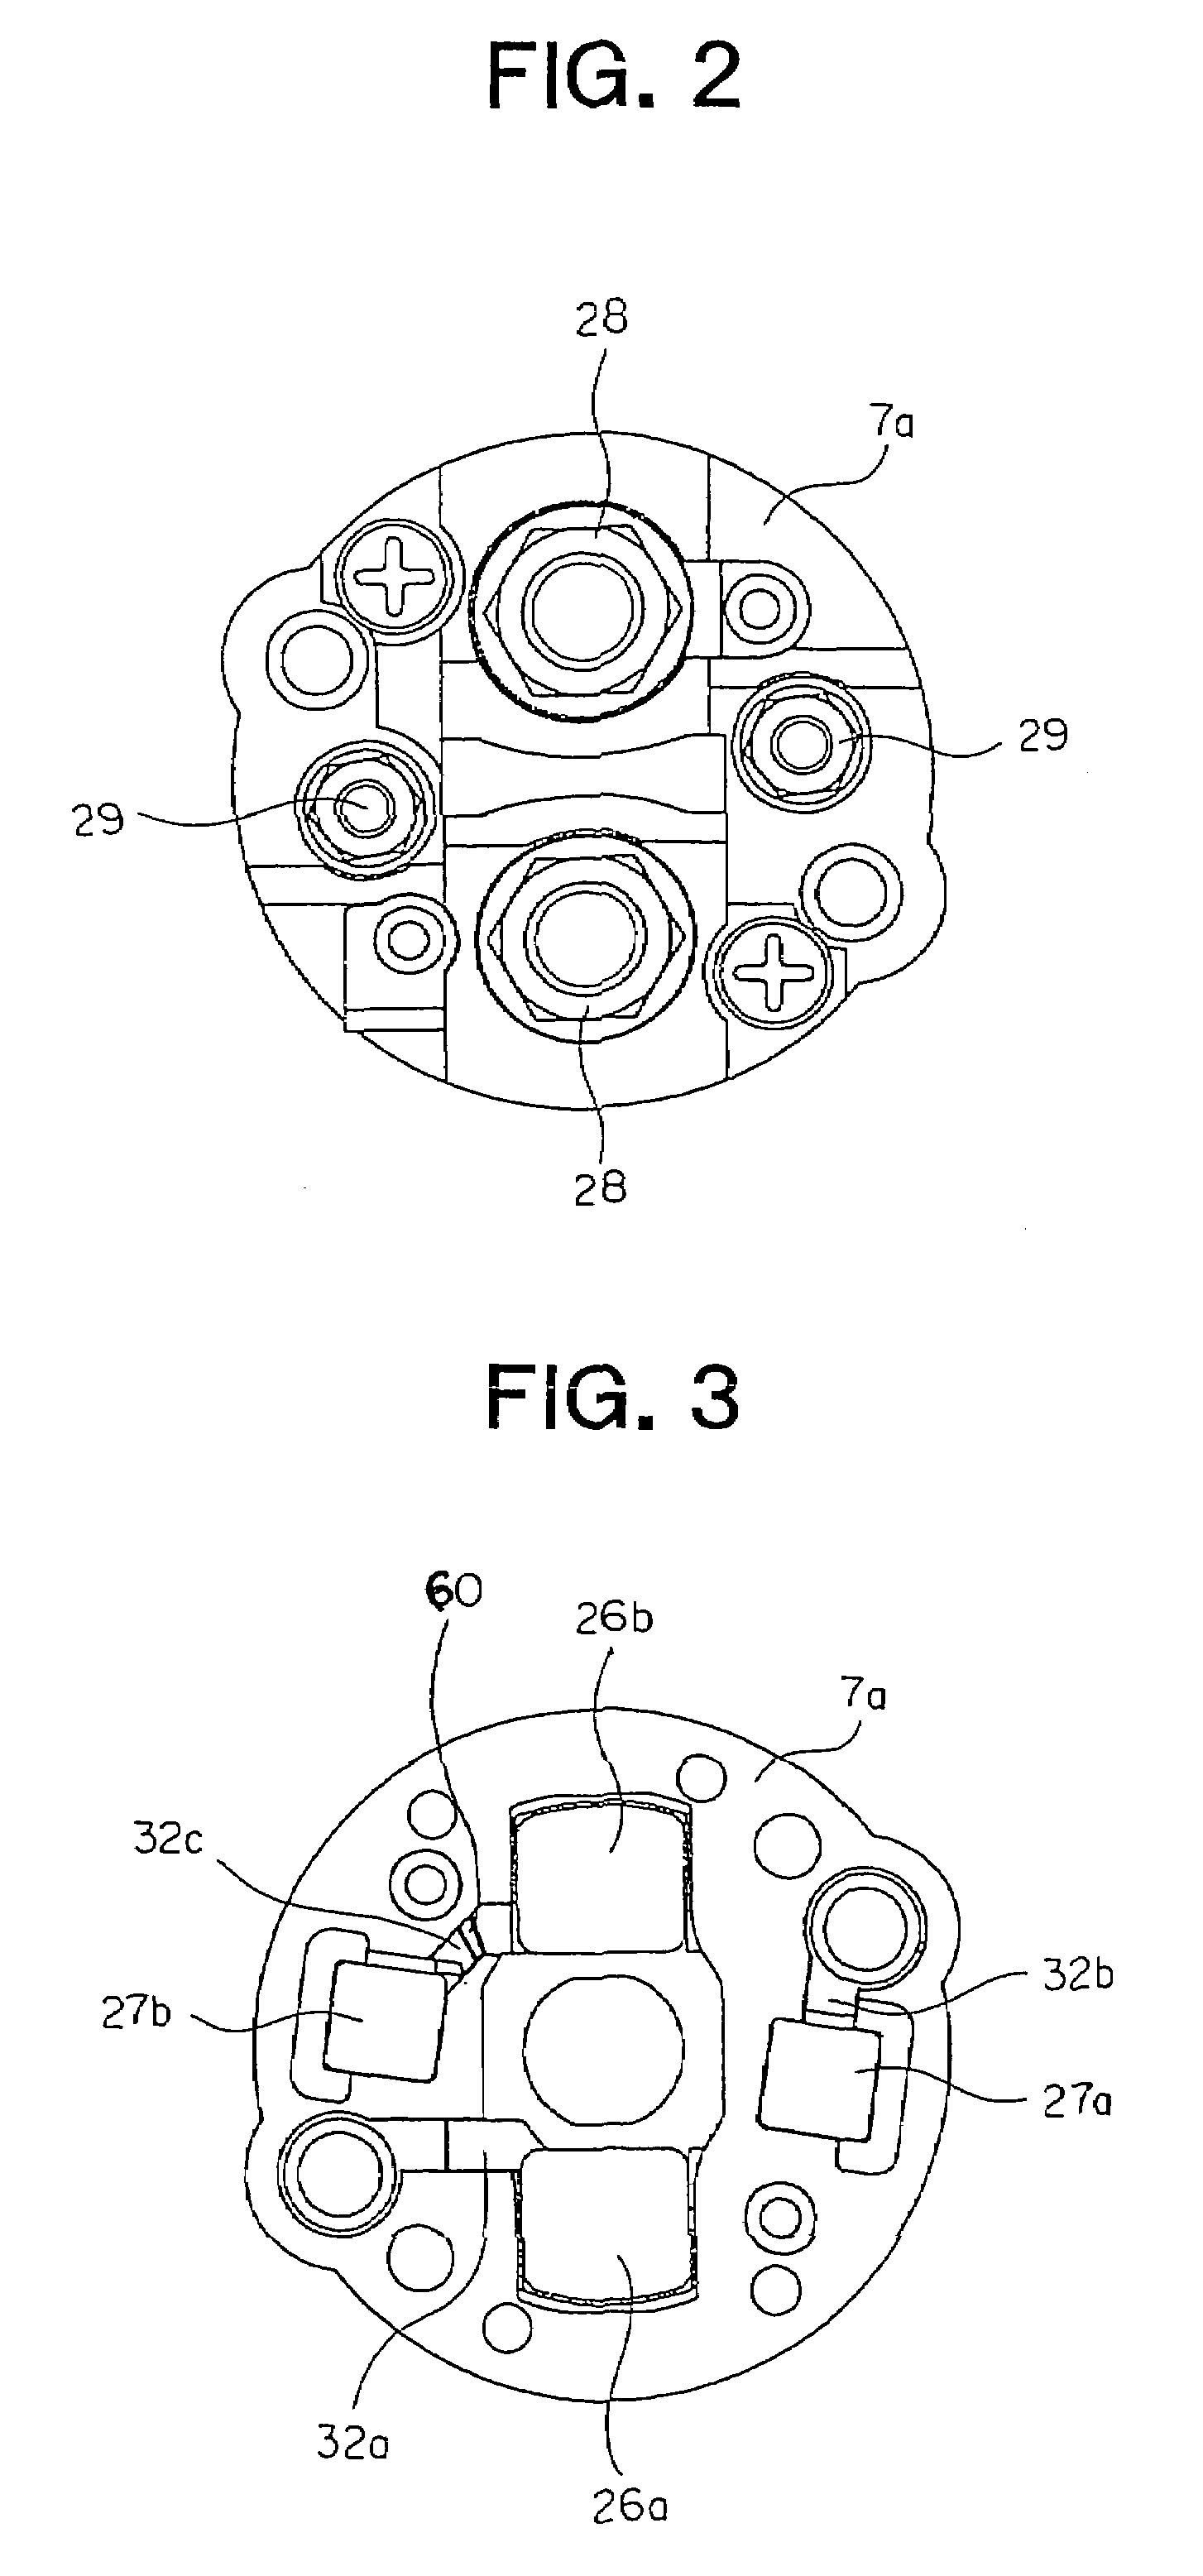 Electromagnetic starter switch